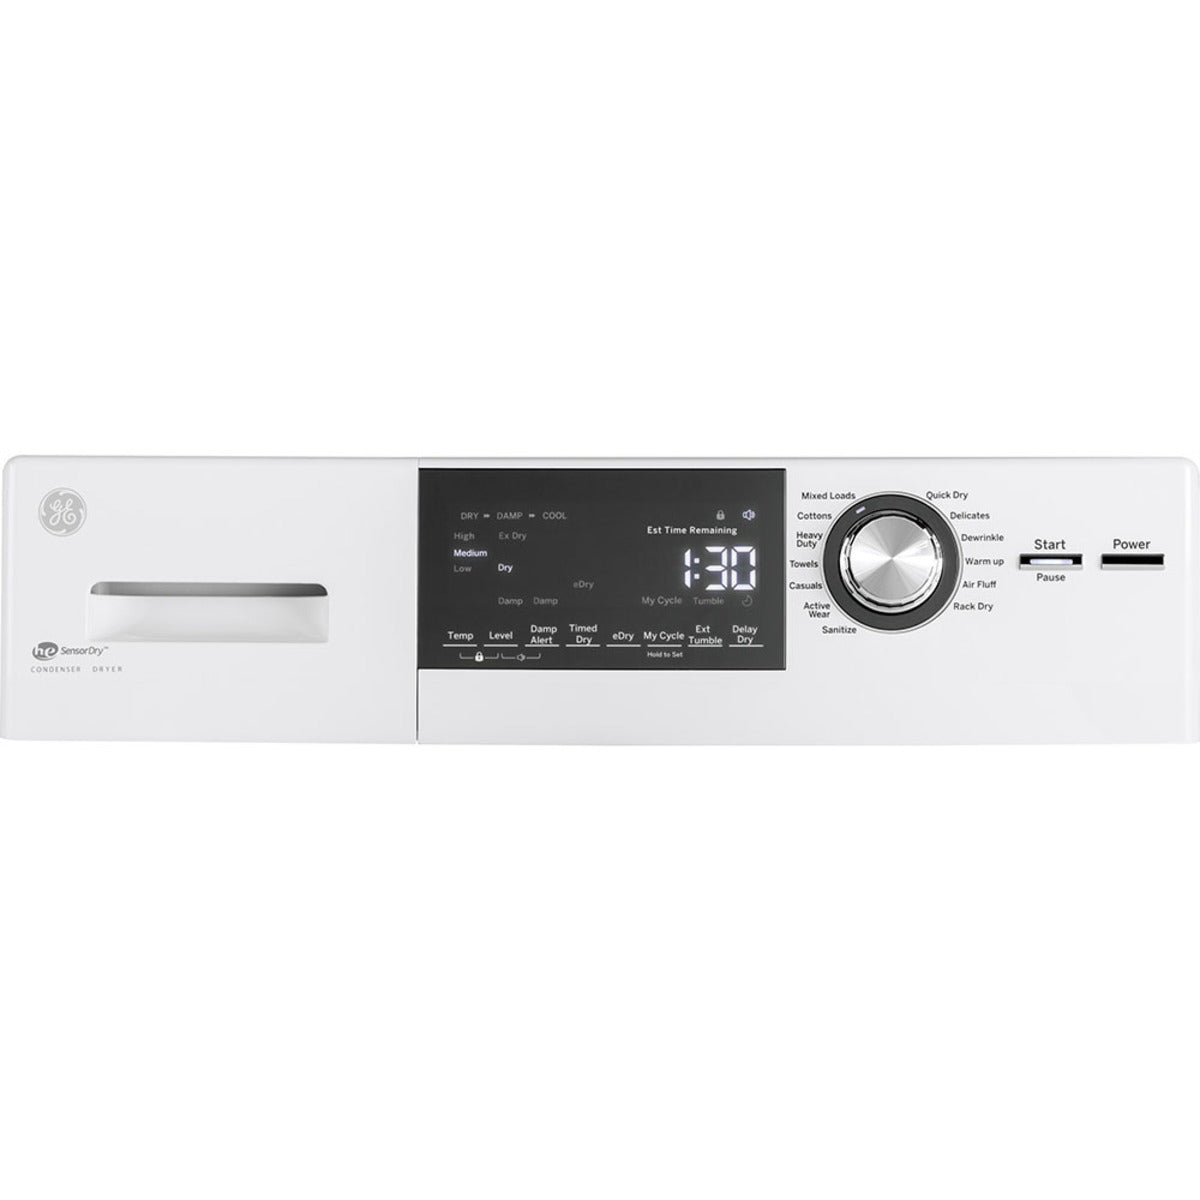 GE - 4.1 cu. Ft  Electric Dryer in White - GFT14JSIMWW